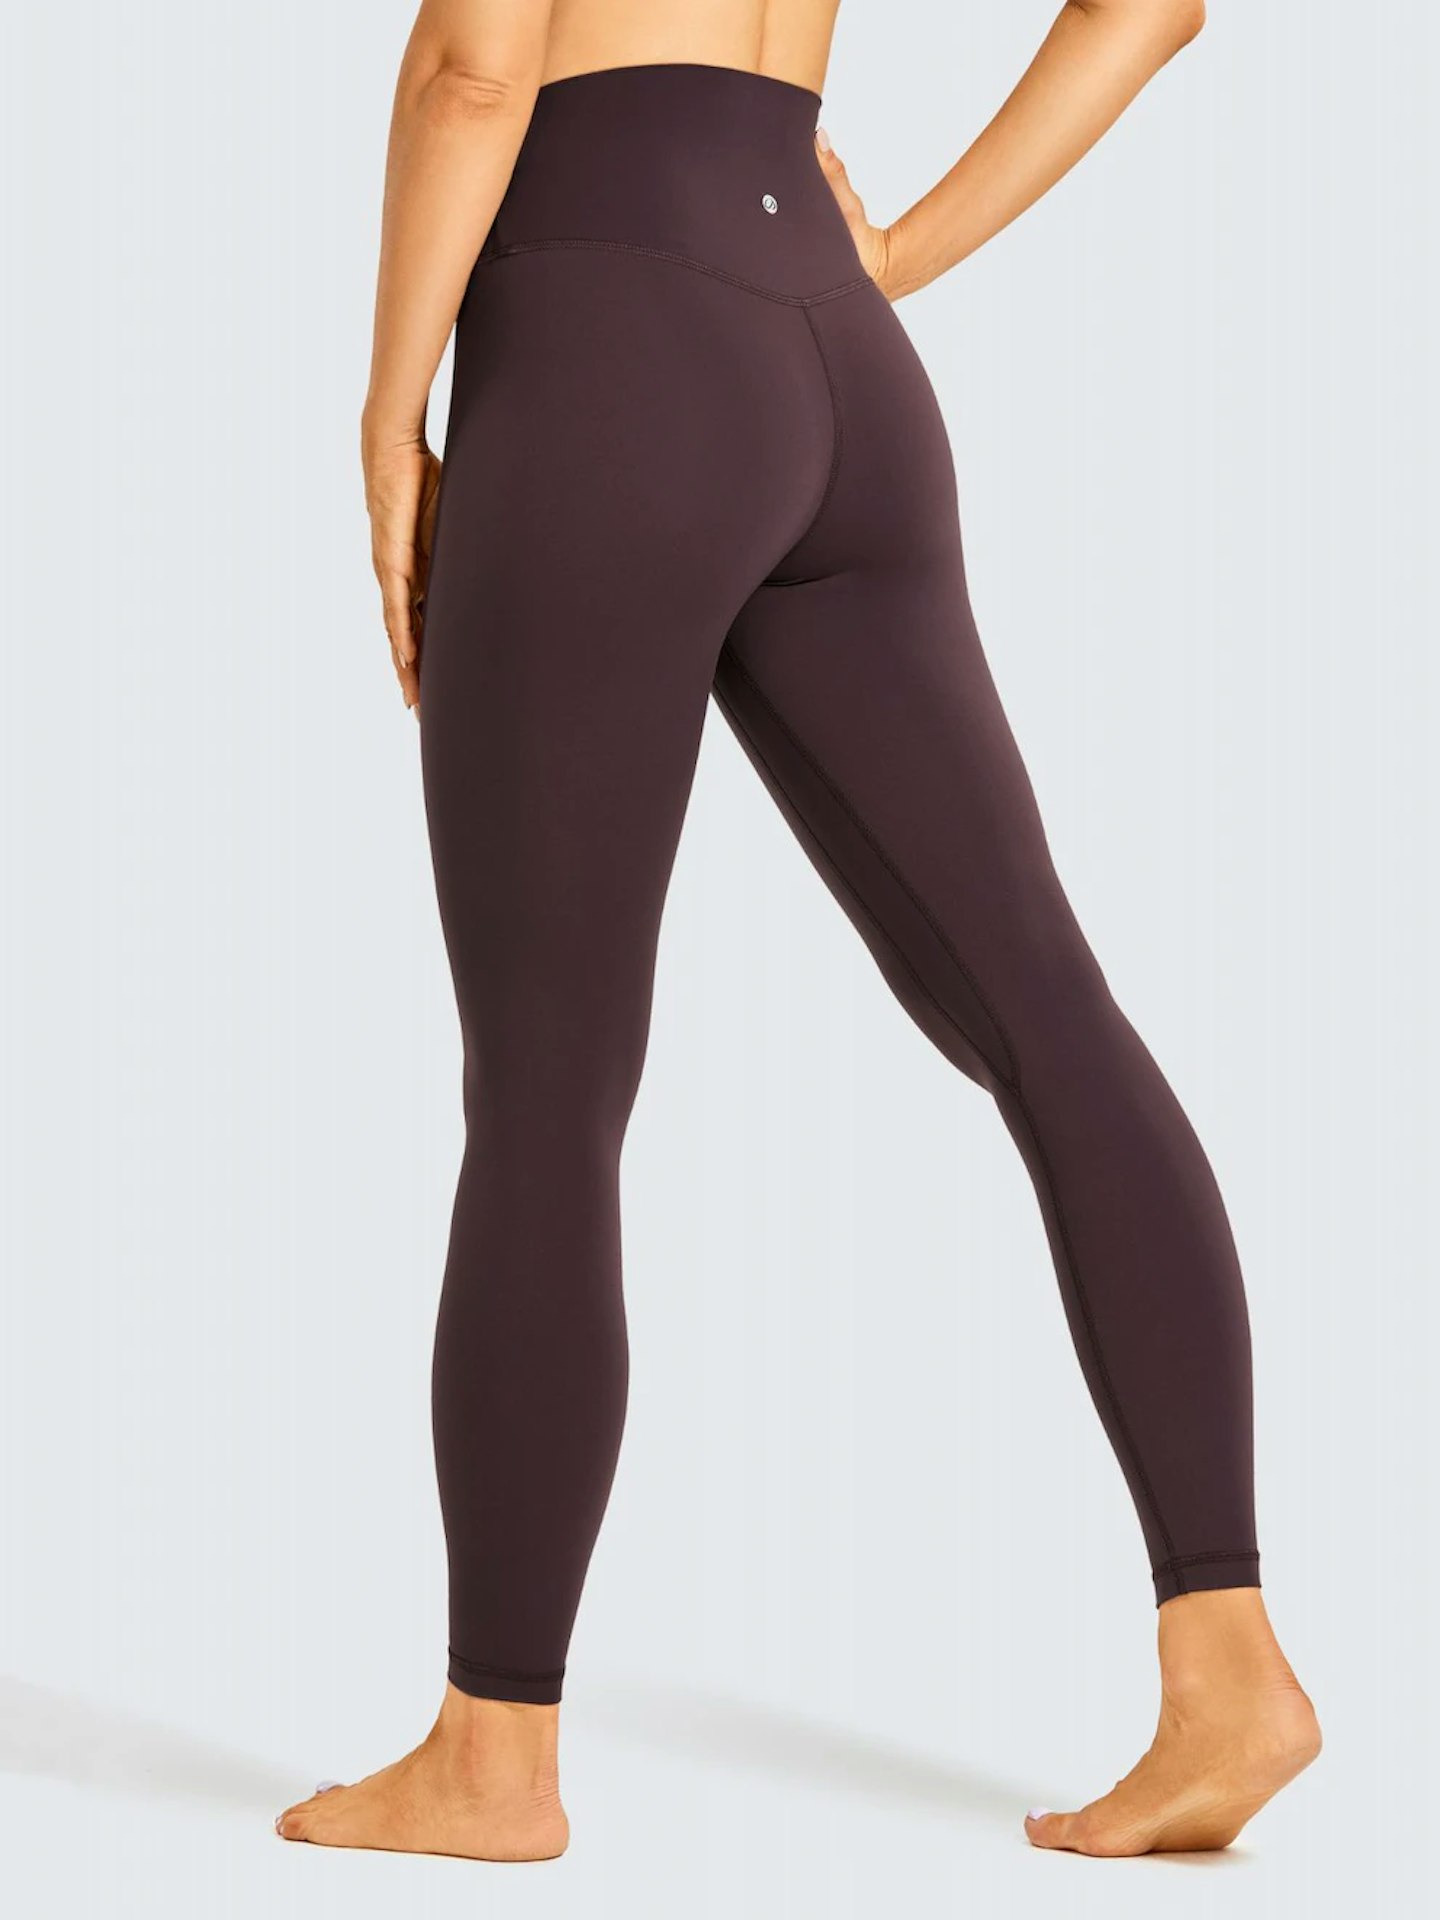 6 Lululemon Dupes For Your Favorite Lululemon Must-Haves - Your Daily Dance